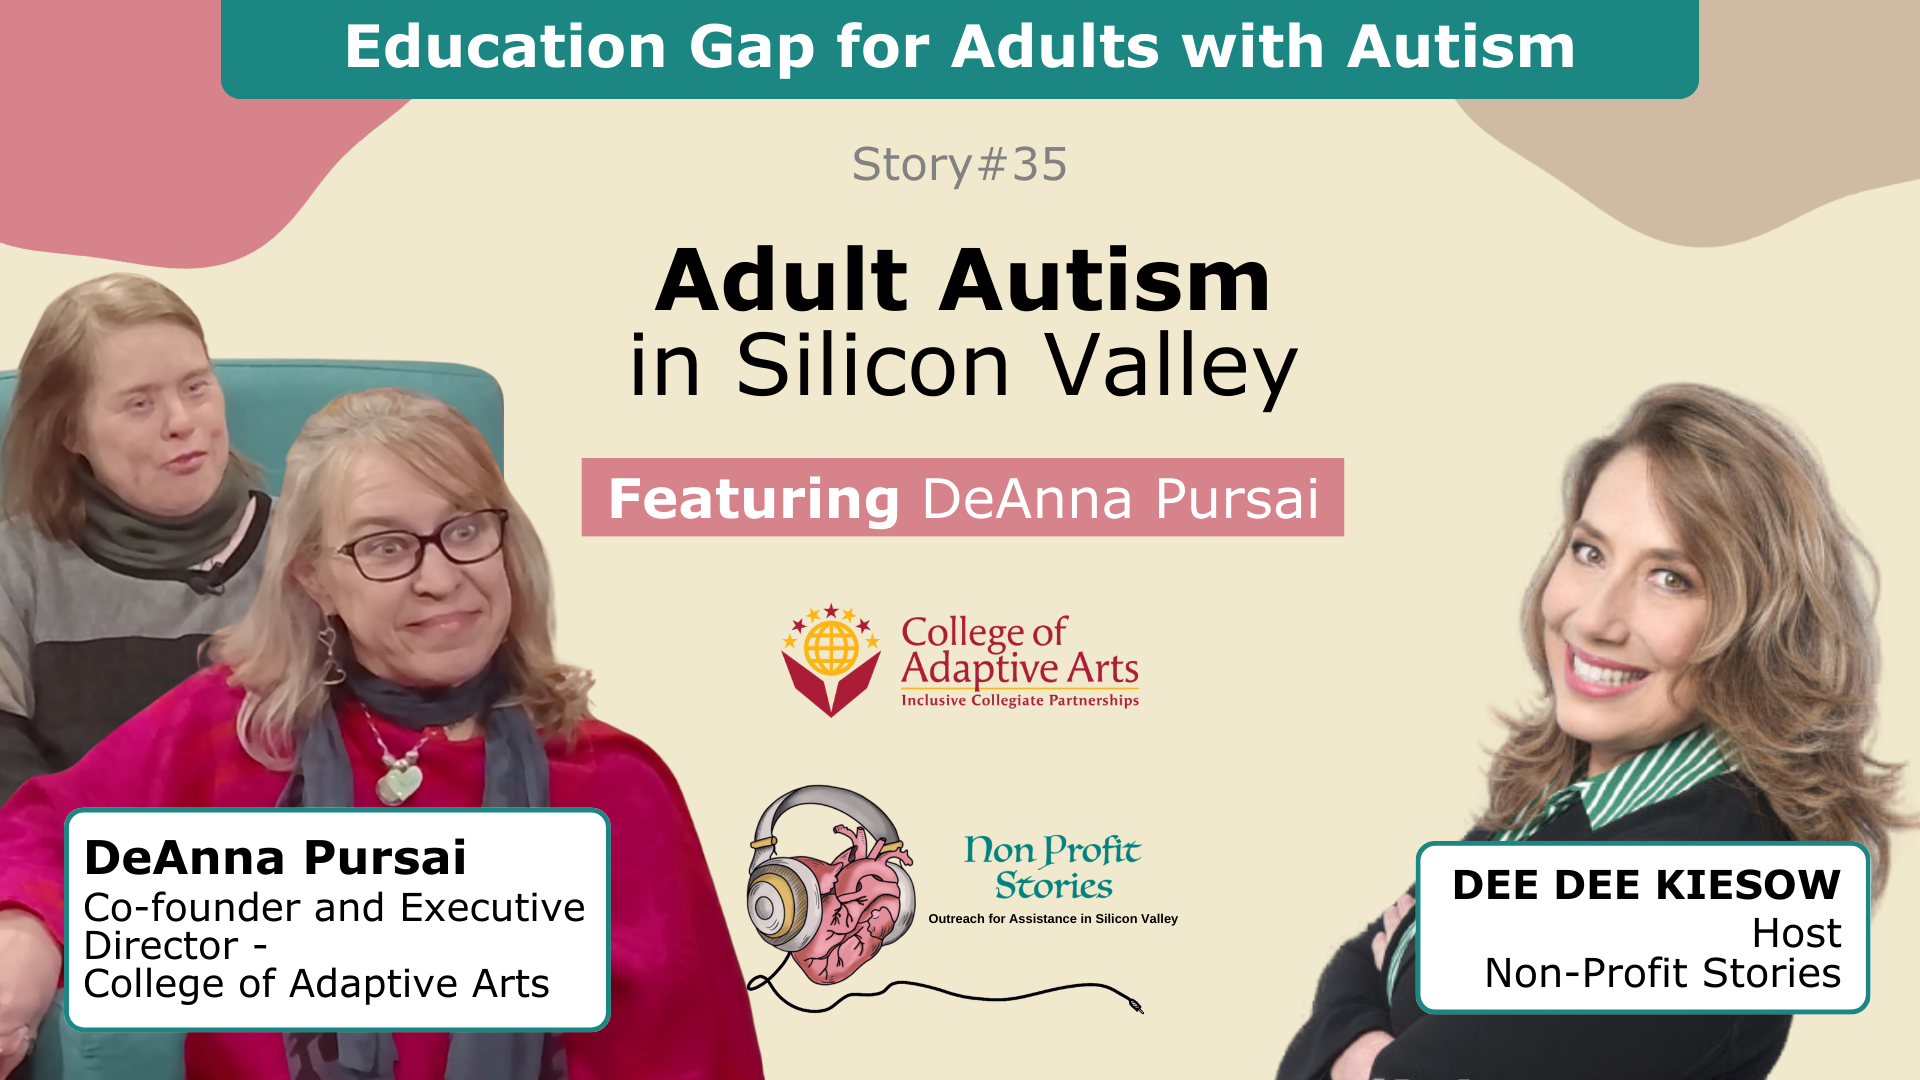 Adult Autism: Education Gap for Adults with Autism in Silicon Valley Video